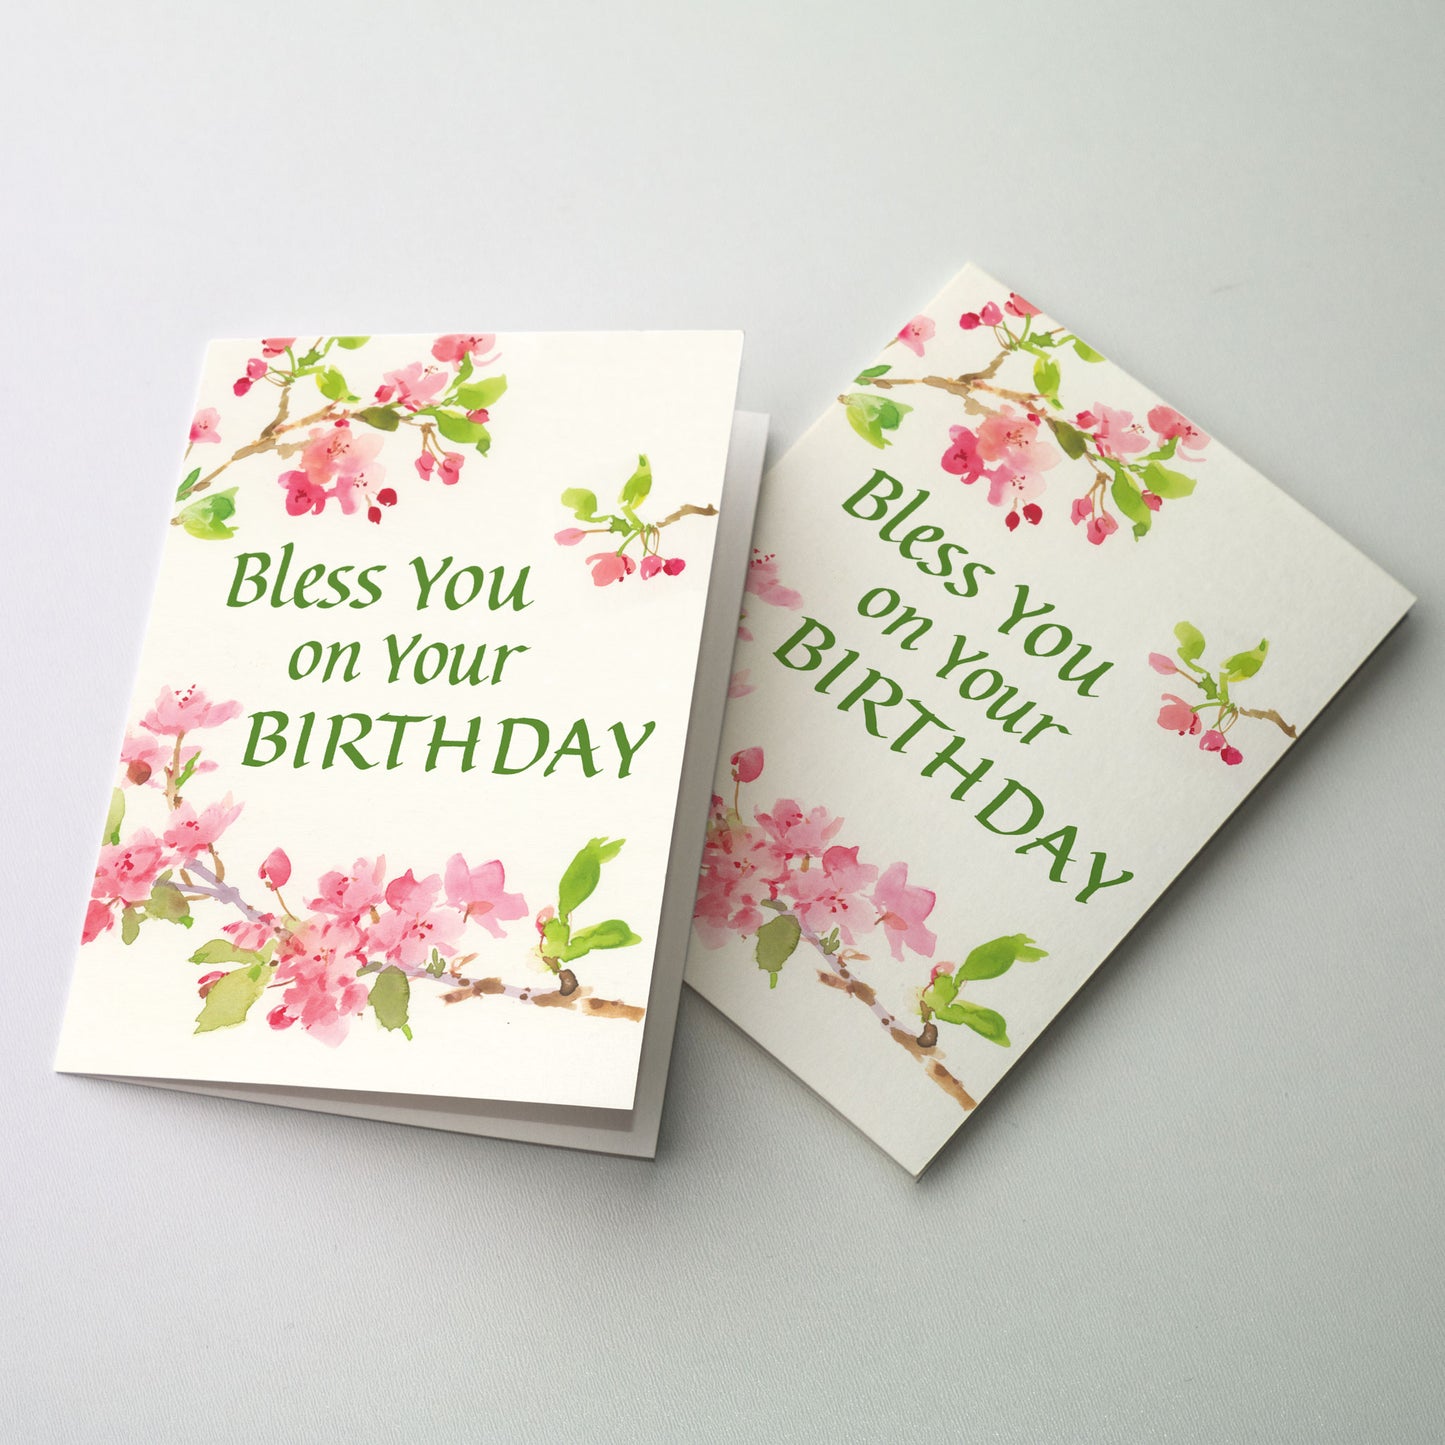 Bless You on Your Birthday - Birthday Card